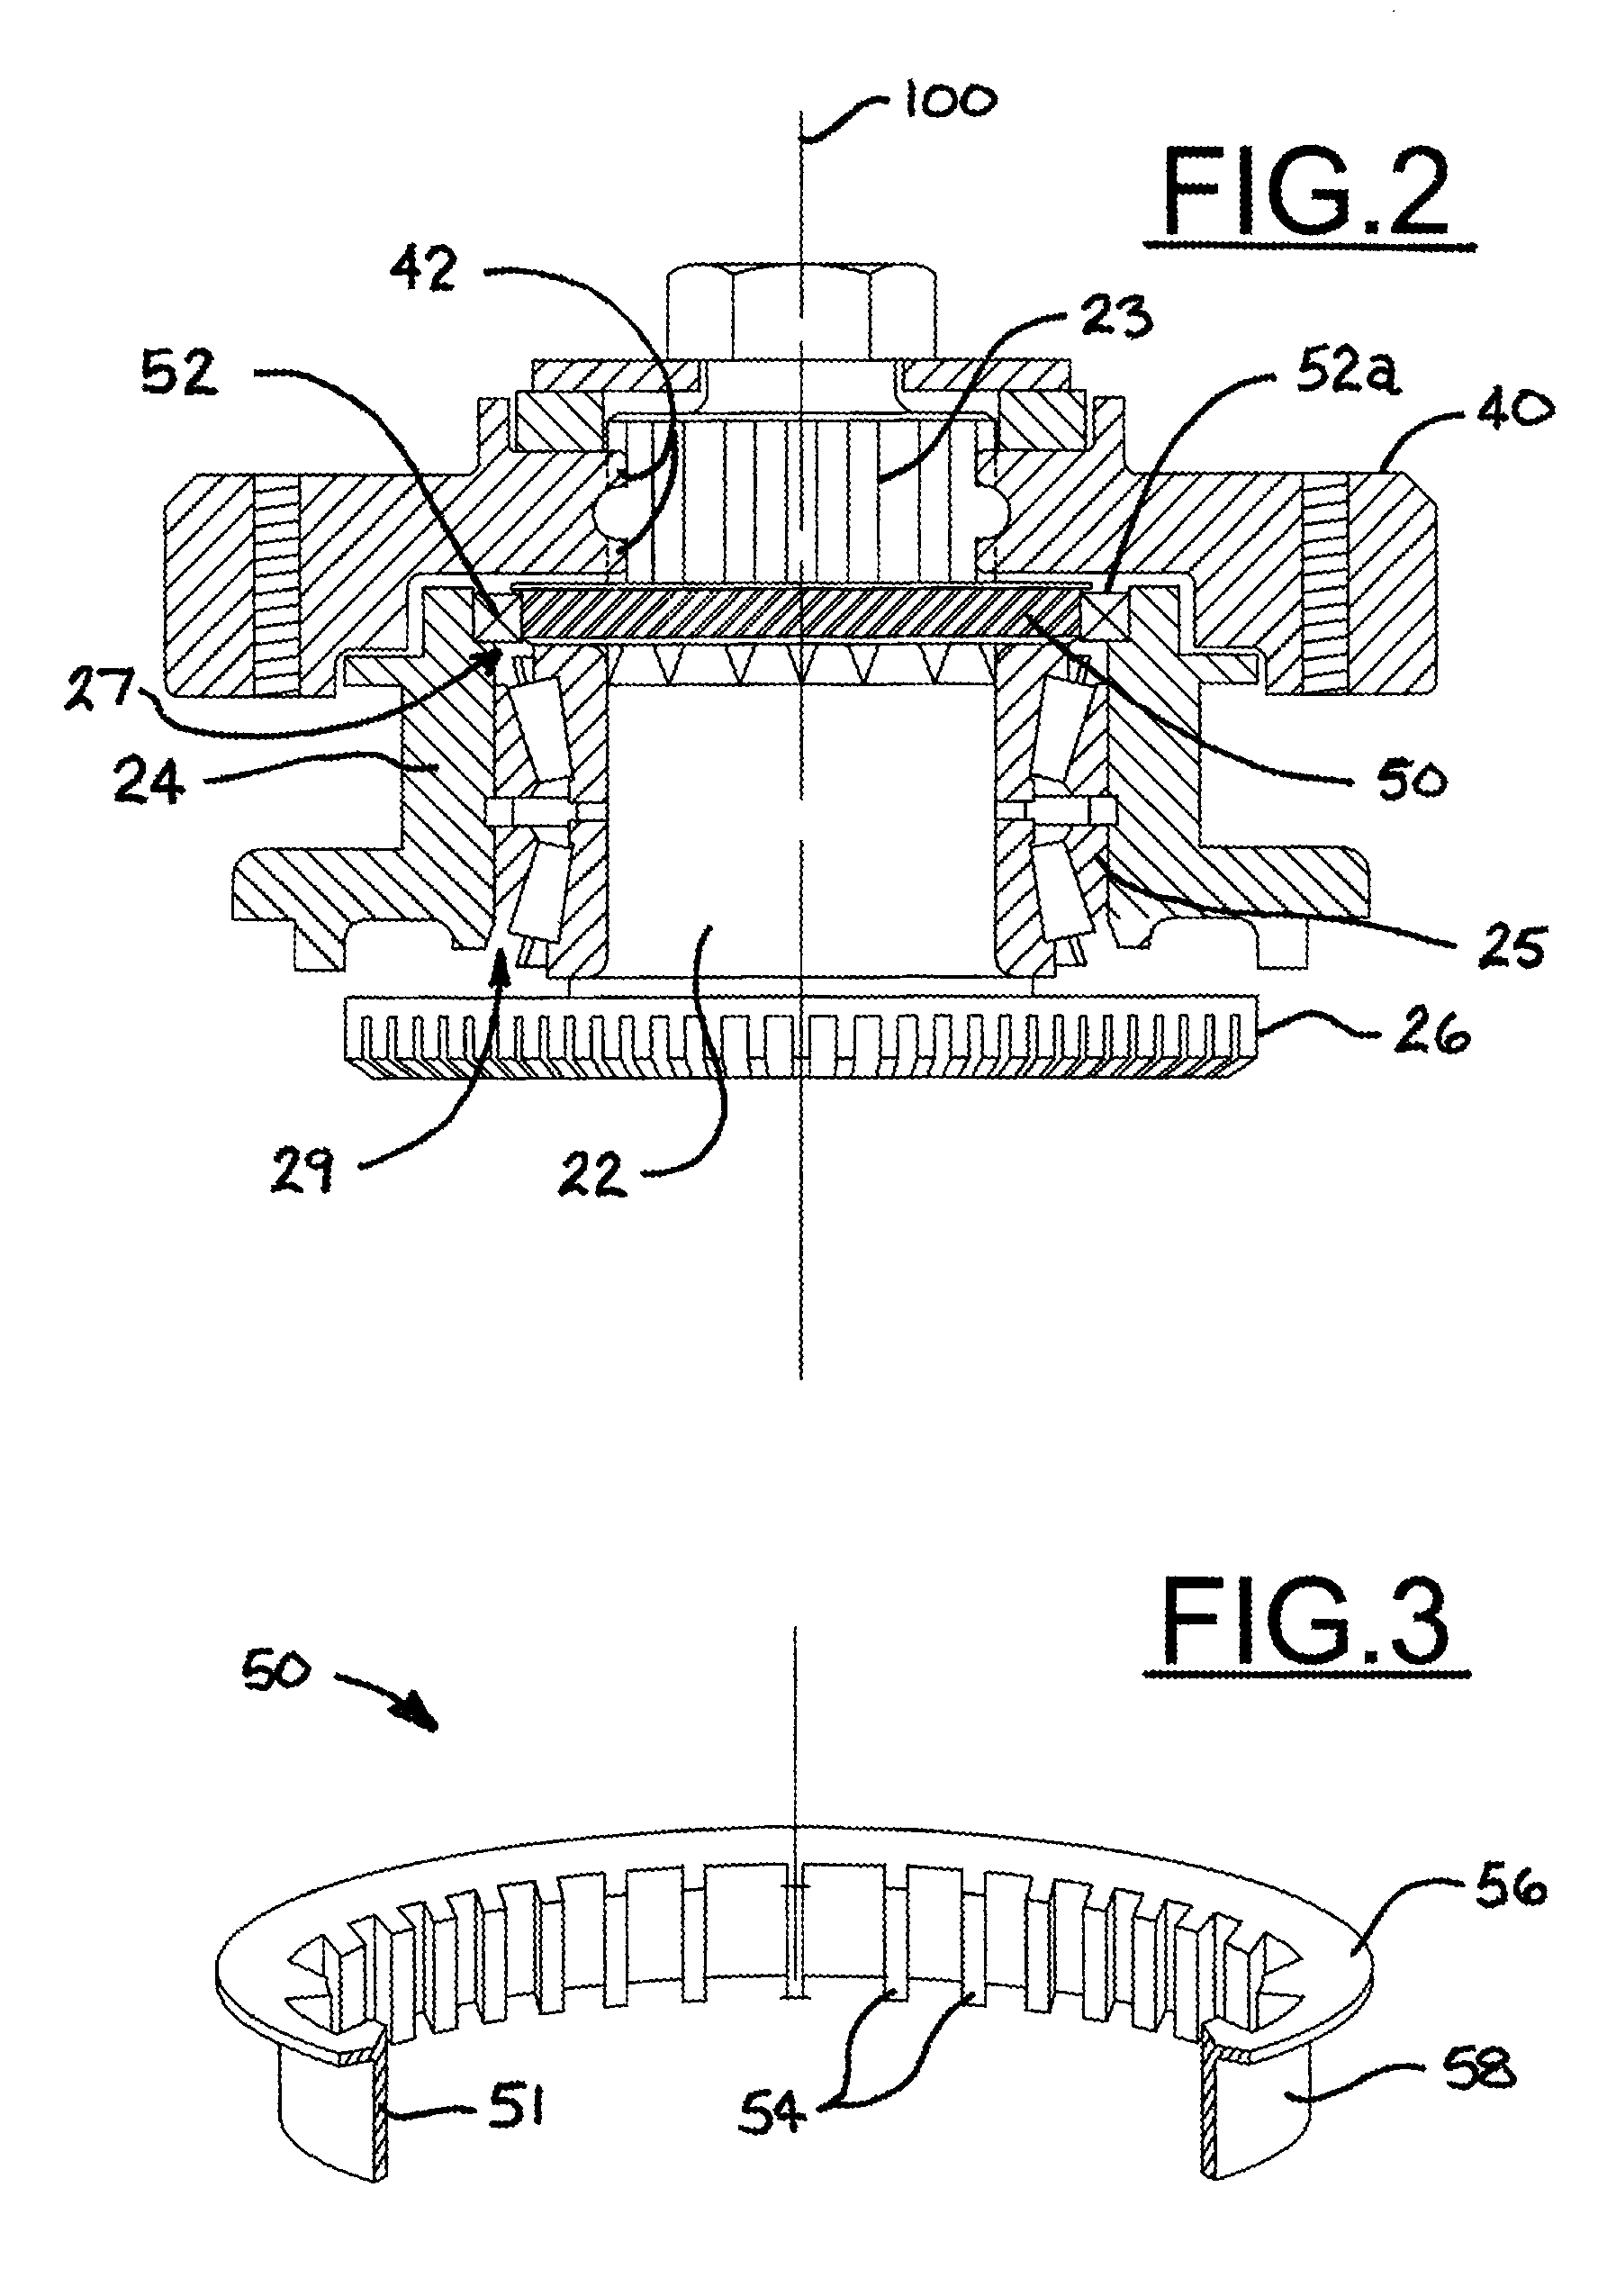 Seal hub for protection of seal and bearing from metal fragments due to shearing of a shock device